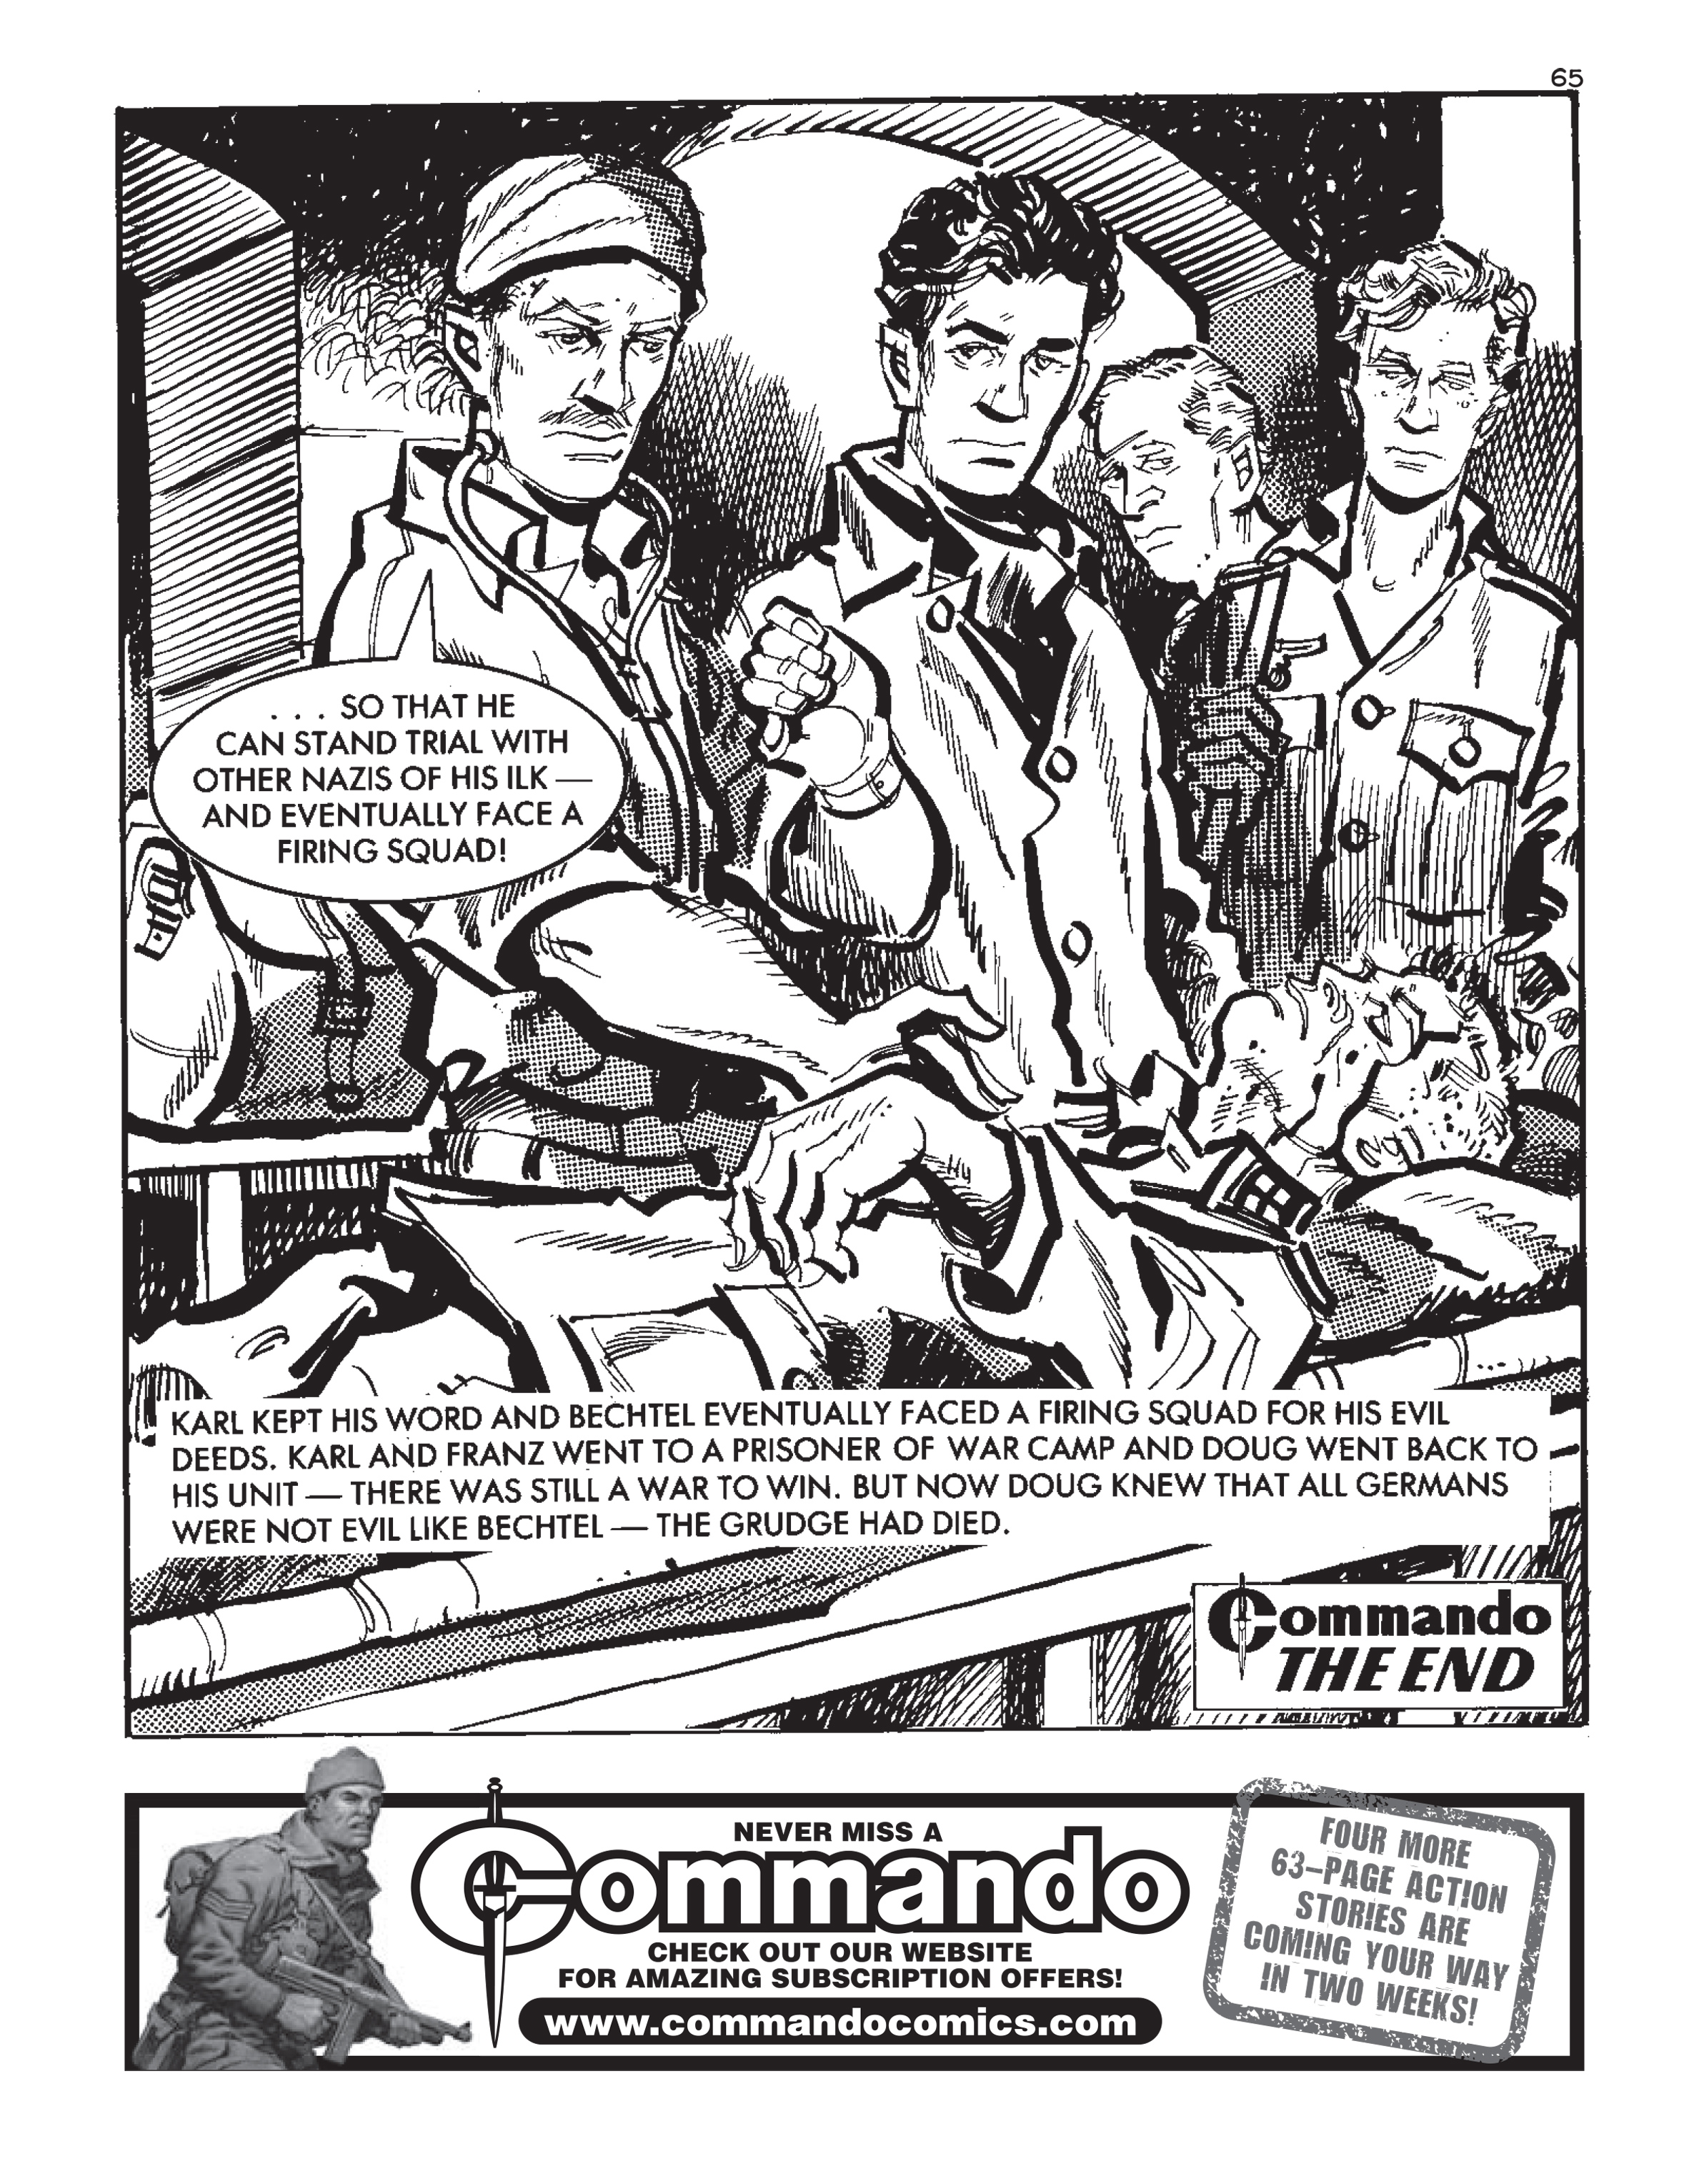 Read online Commando: For Action and Adventure comic -  Issue #5194 - 64